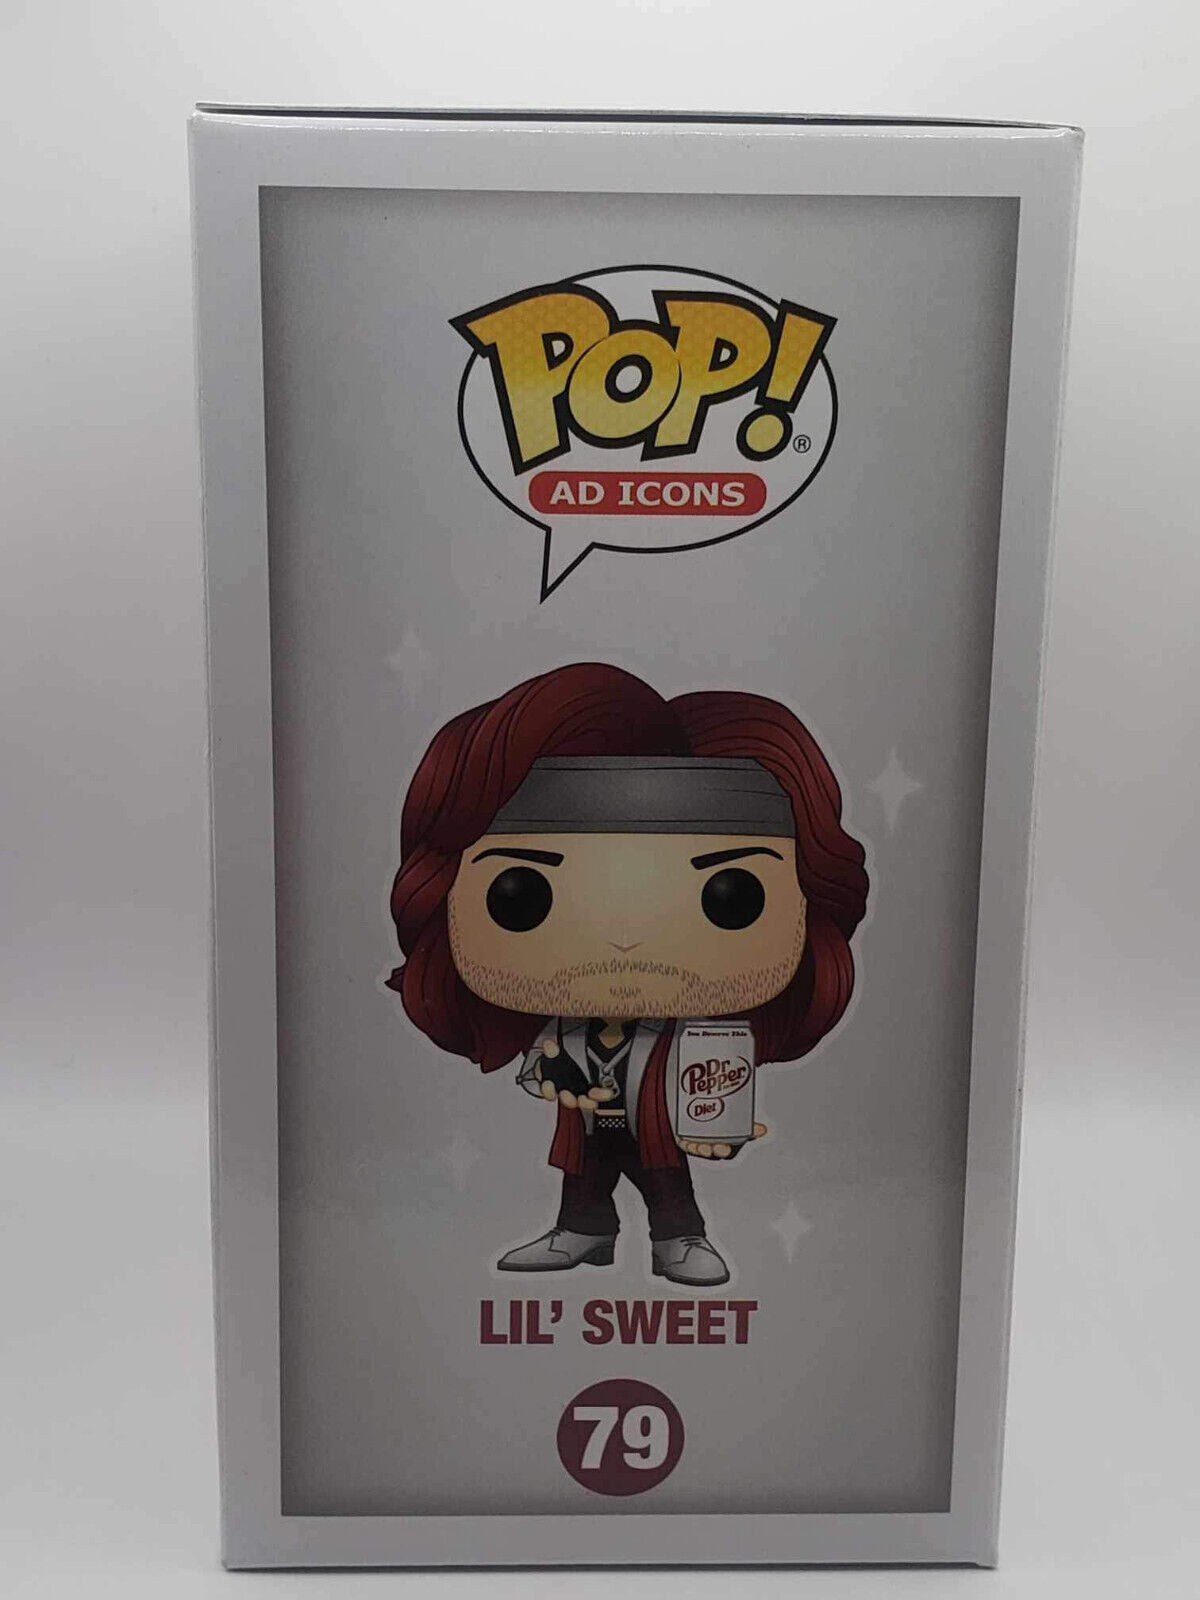 Funko Pop! Ad Icons Dr Pepper Lil' Sweet Vinyl Figure Dr. Pepper Exclusive #79